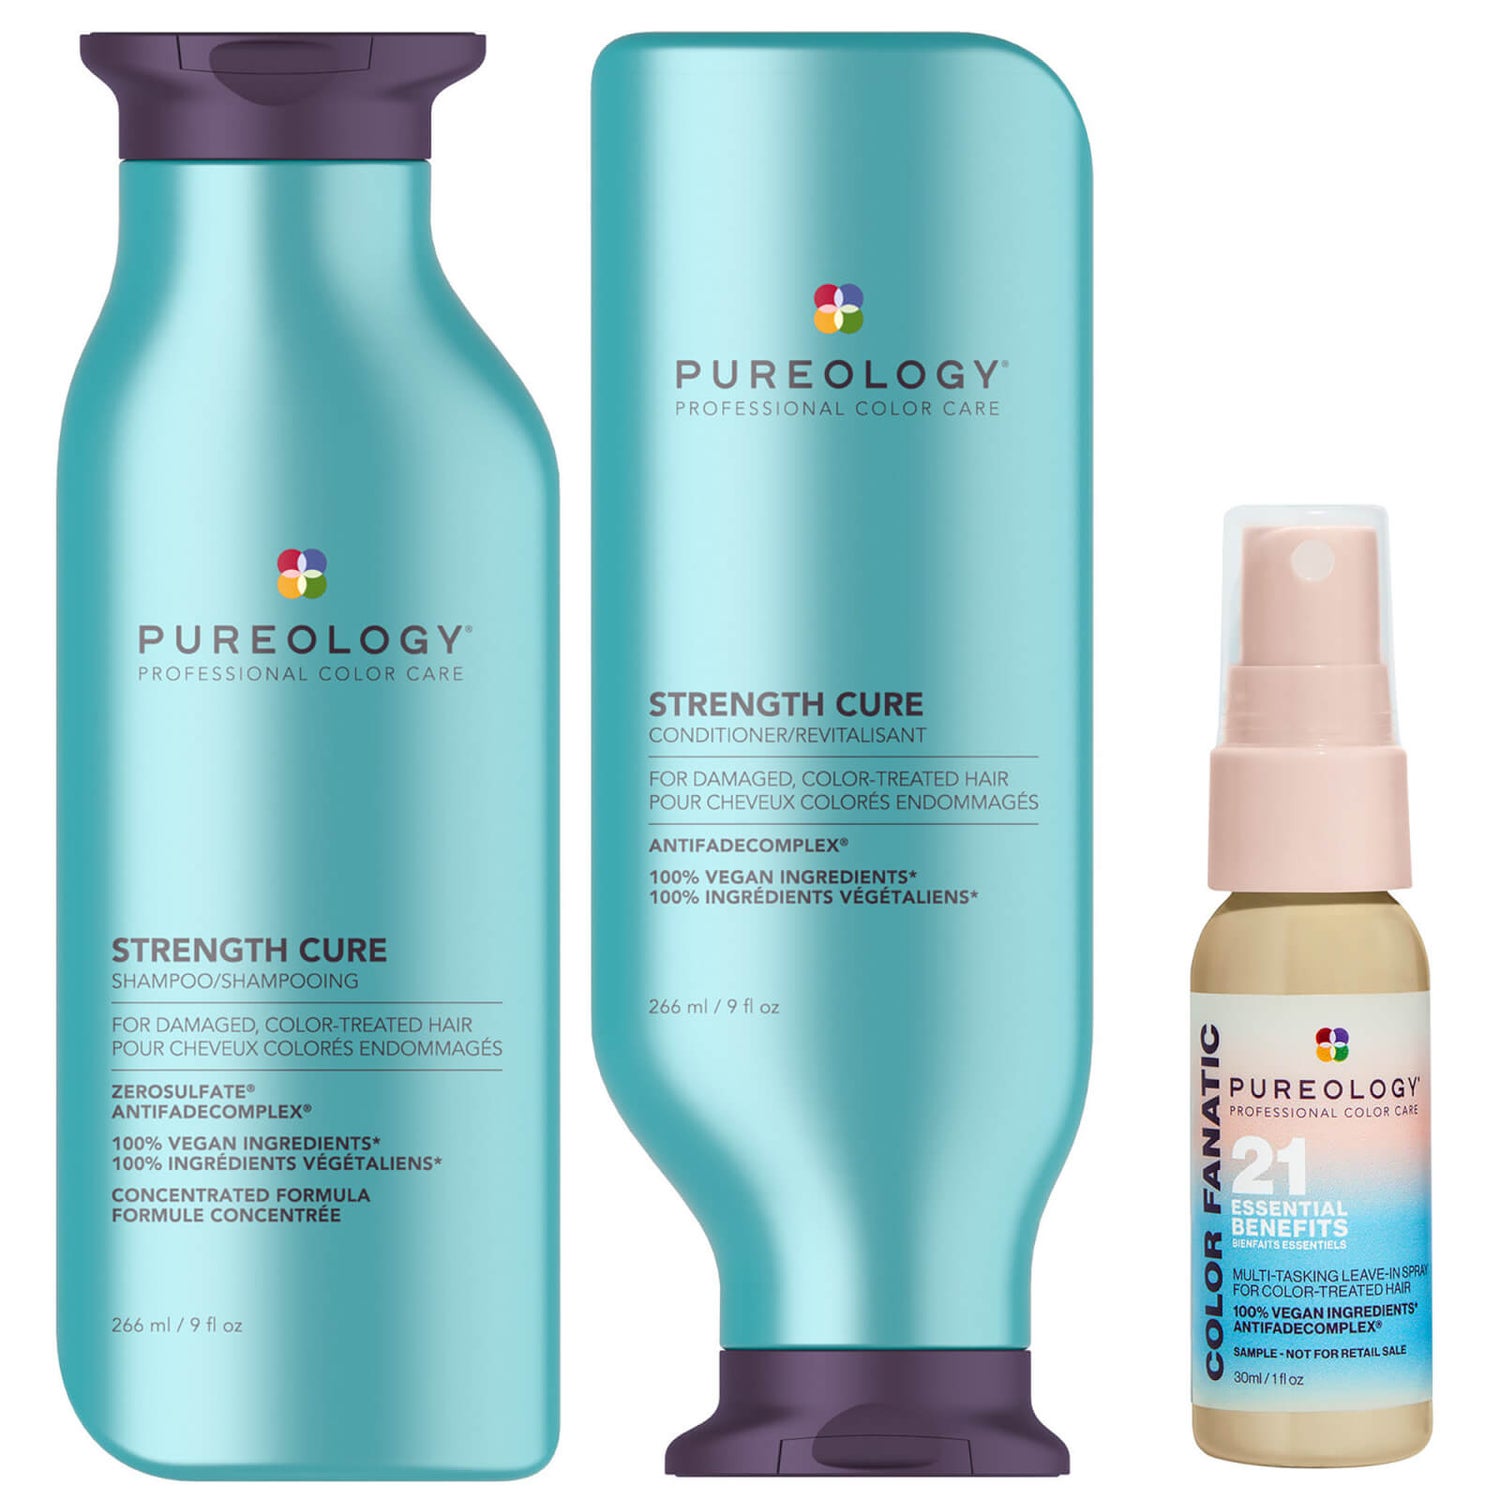 Pureology Strength Cure Shampoo 266ml, Conditioner 266ml and Color Fanatic 30ml Mini Routine for Coloured Hair (Worth £58.18)